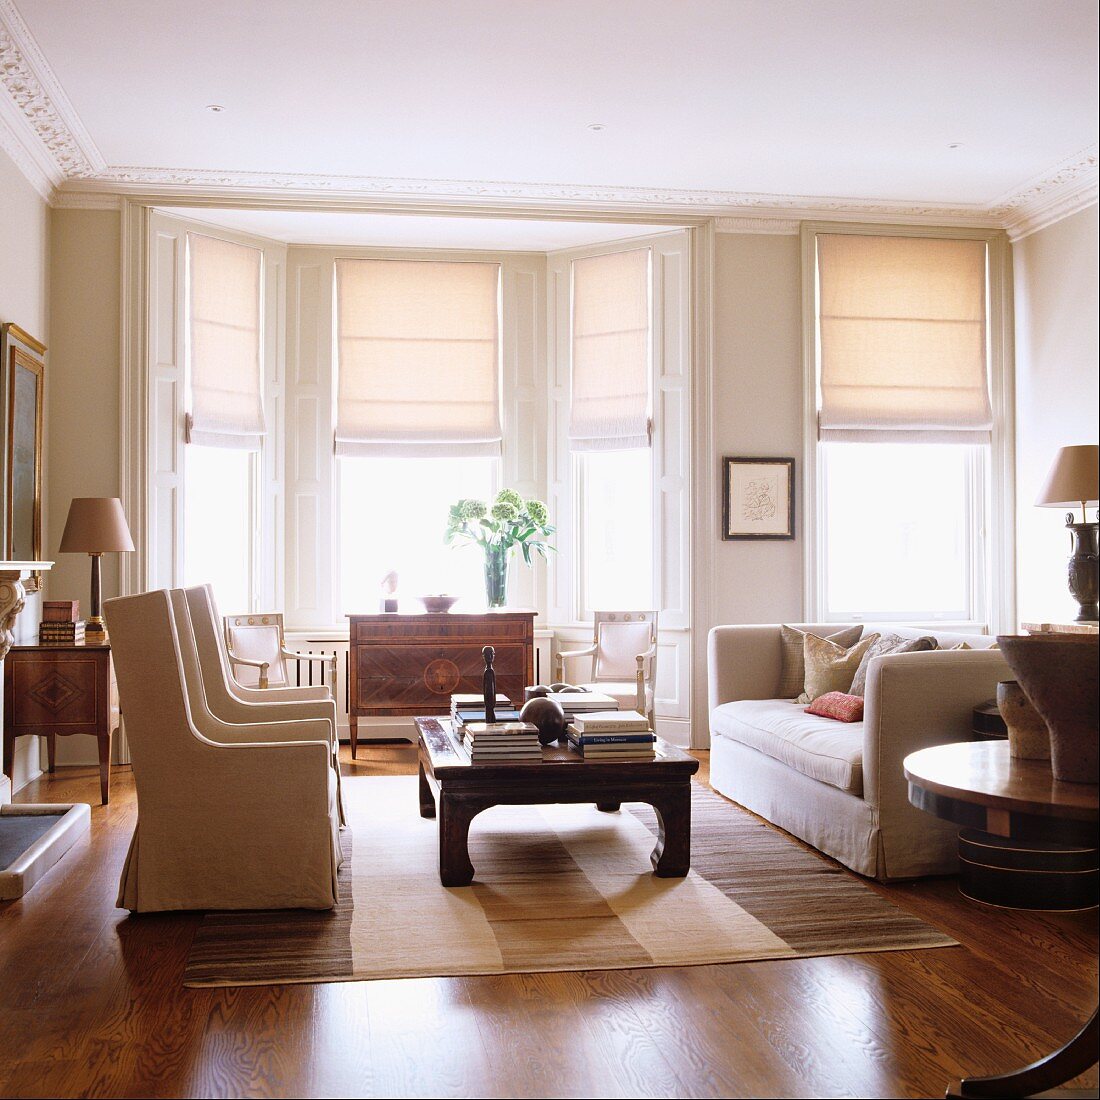 Living room: elegant, light colored furniture with a bay window and half-closed Roman blinds at the windows